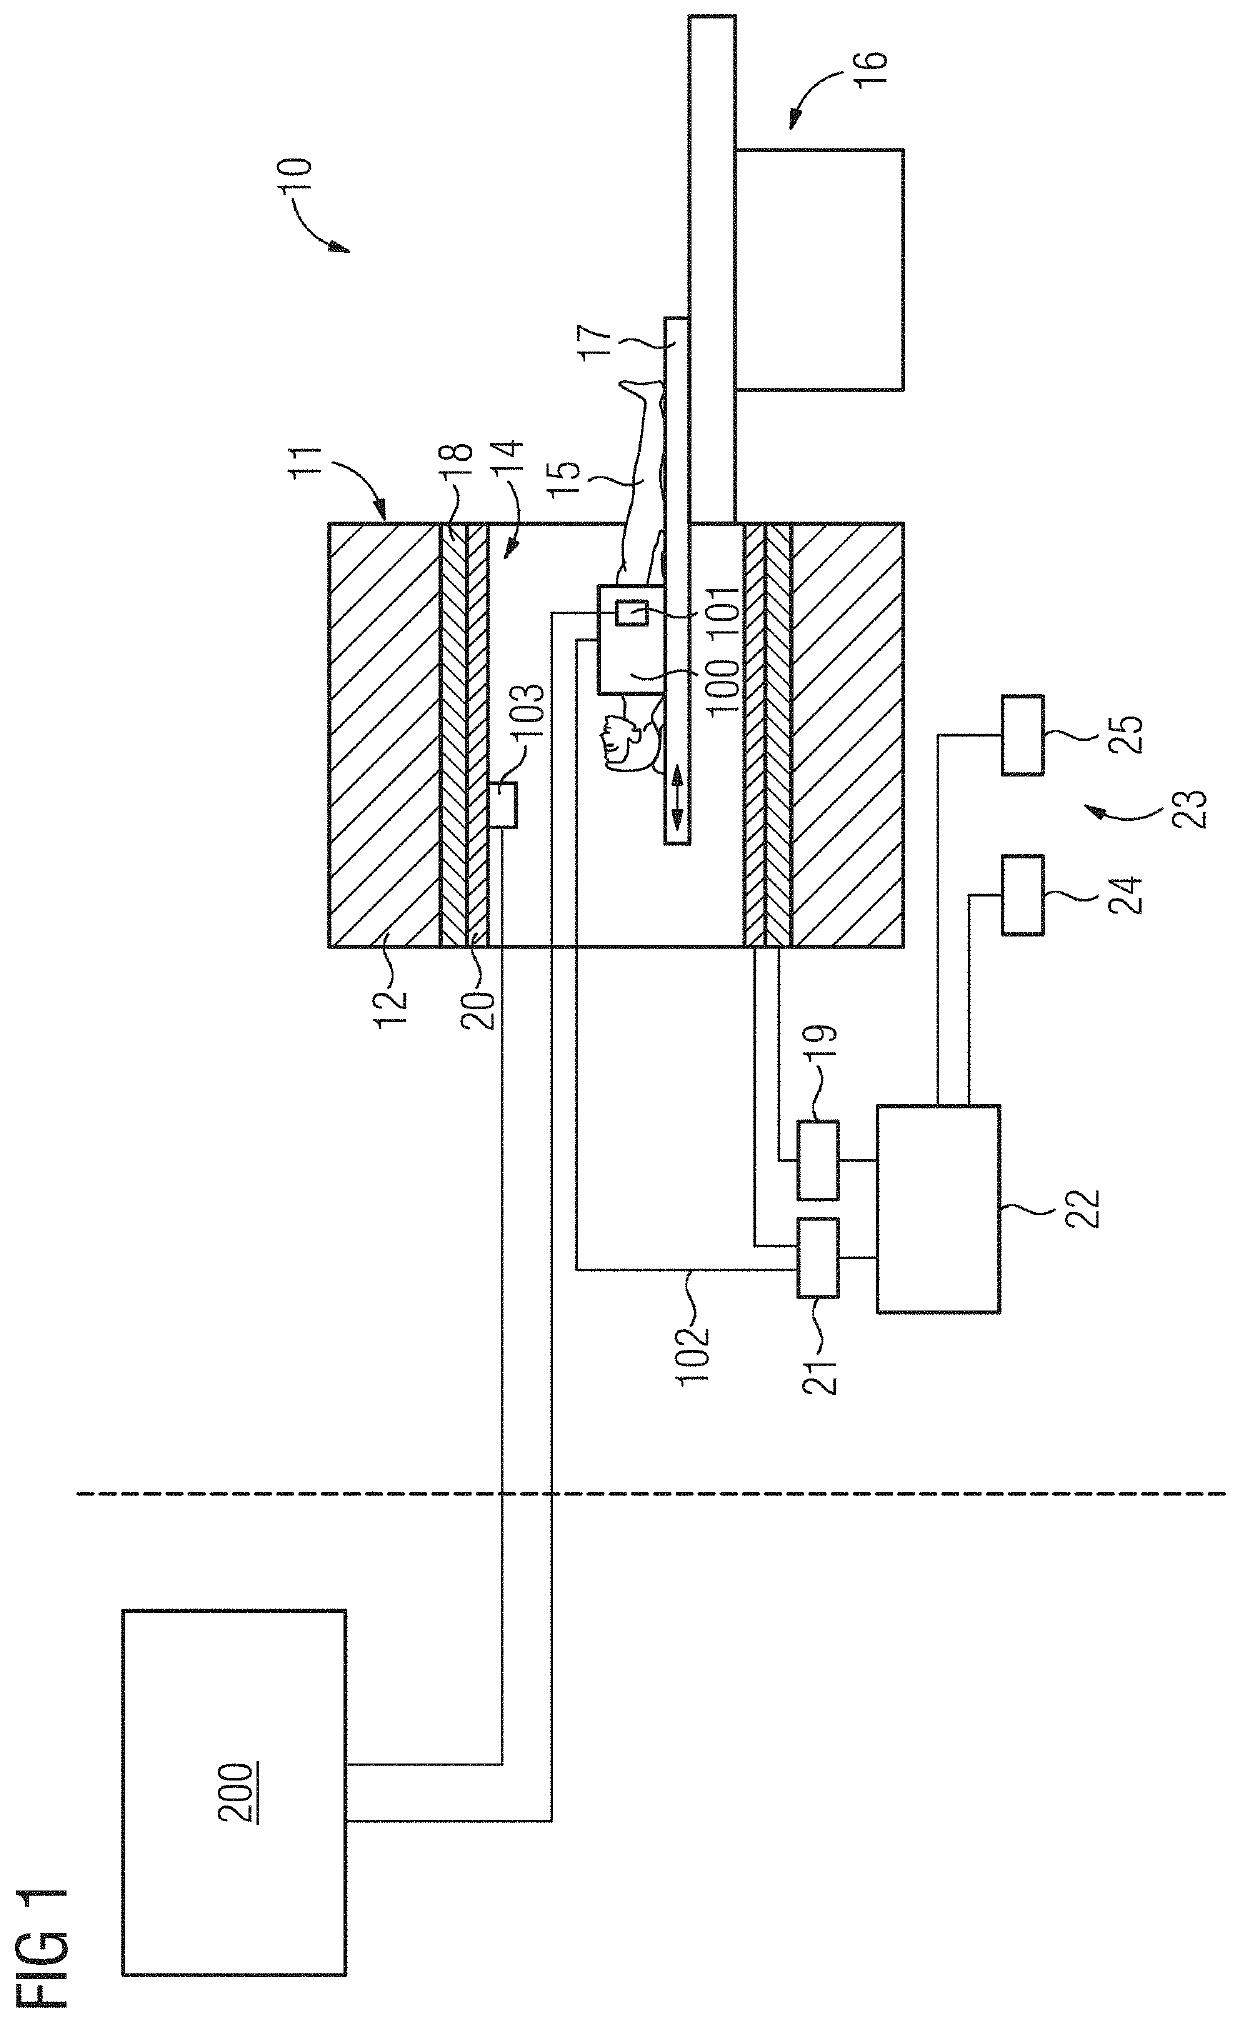 Predicting a potential failure of a module for use in a magnetic resonance apparatus